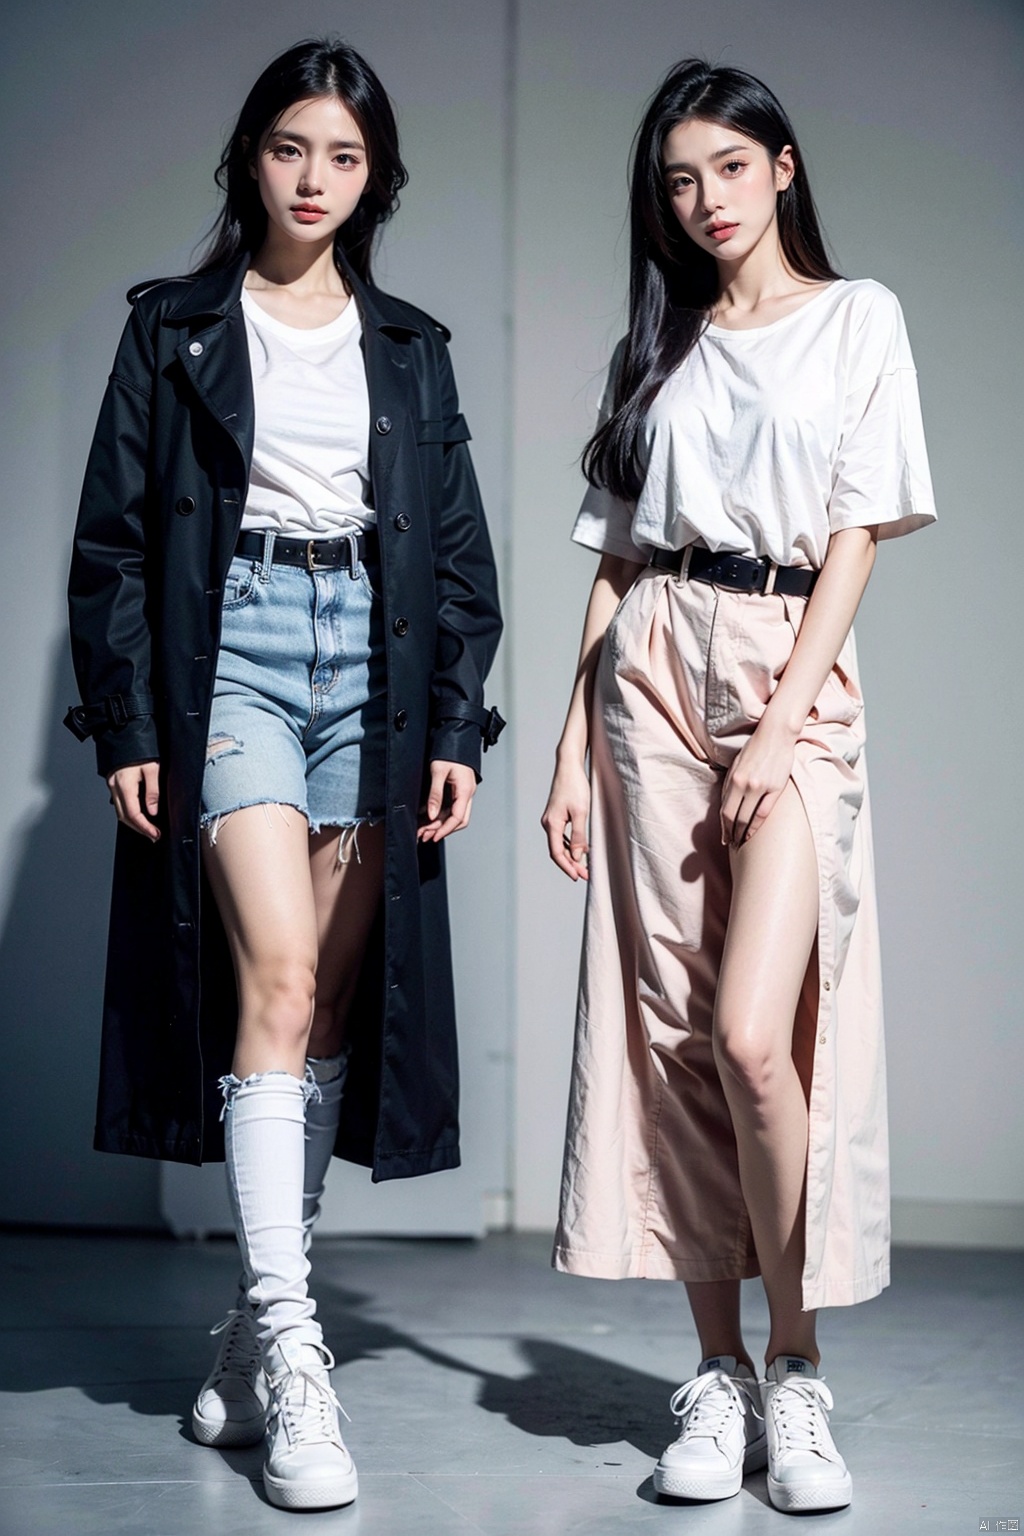 2 Girls standing side by side, the girl on the left, long black hair, the top is wearing a simple white T-shirt, the bottom with a pair of high-waisted blue jeans, the feet are wearing a pair of white sneakers, over a khaki trench coat, the girl on the right, long white hair, the top is wearing a pink floral dress, the waist has a brown belt. He wore a pair of brown ankle boots. Arnold, Carrara, highest quality, high resolution, full HD, fine detail, warm colors